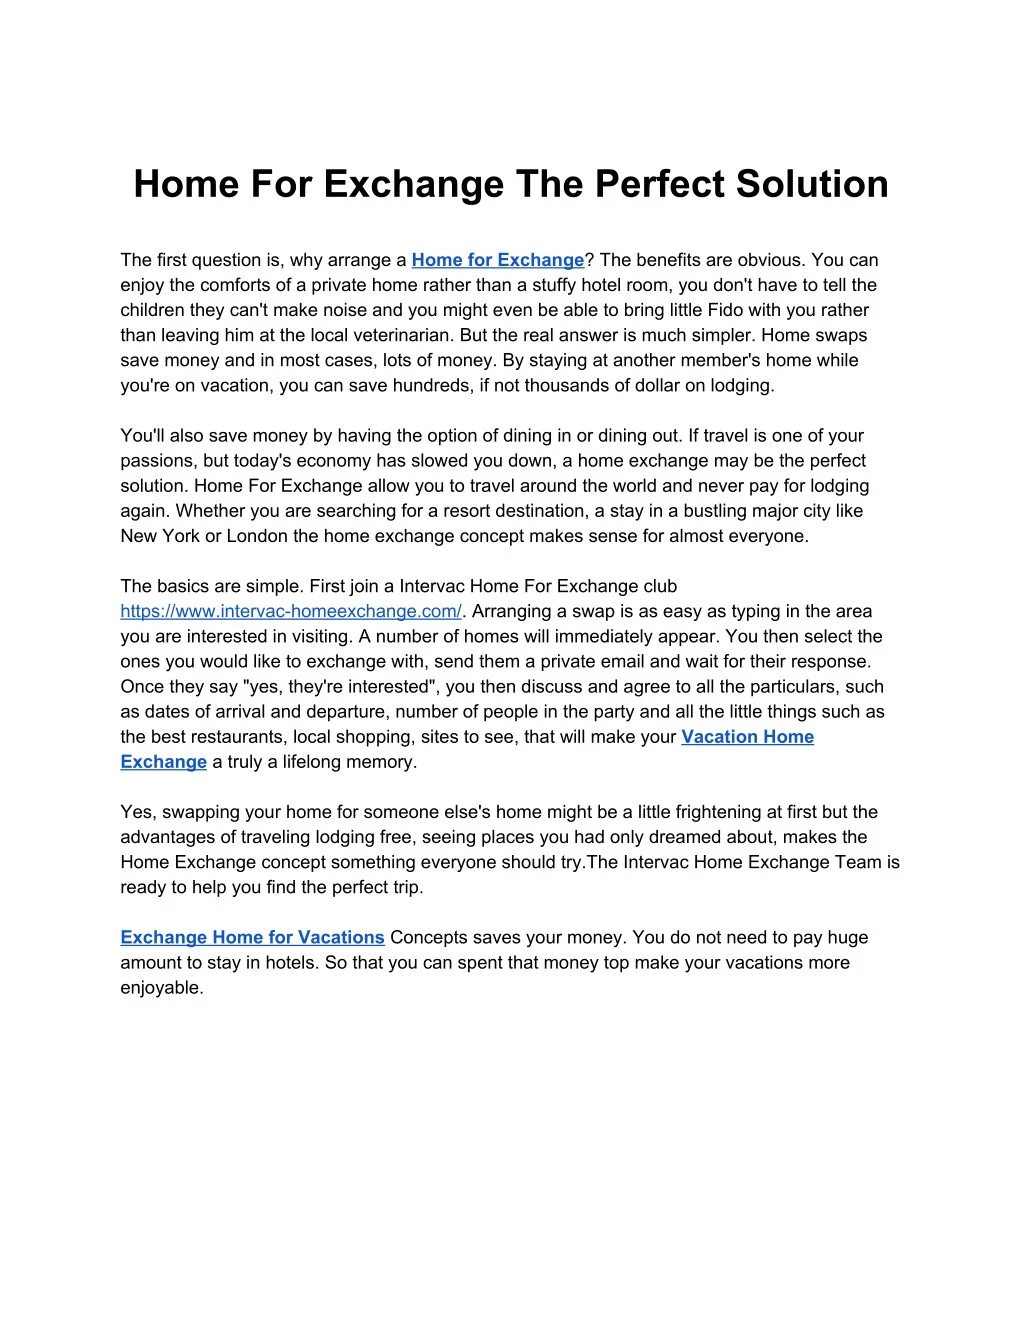 home for exchange the perfect solution